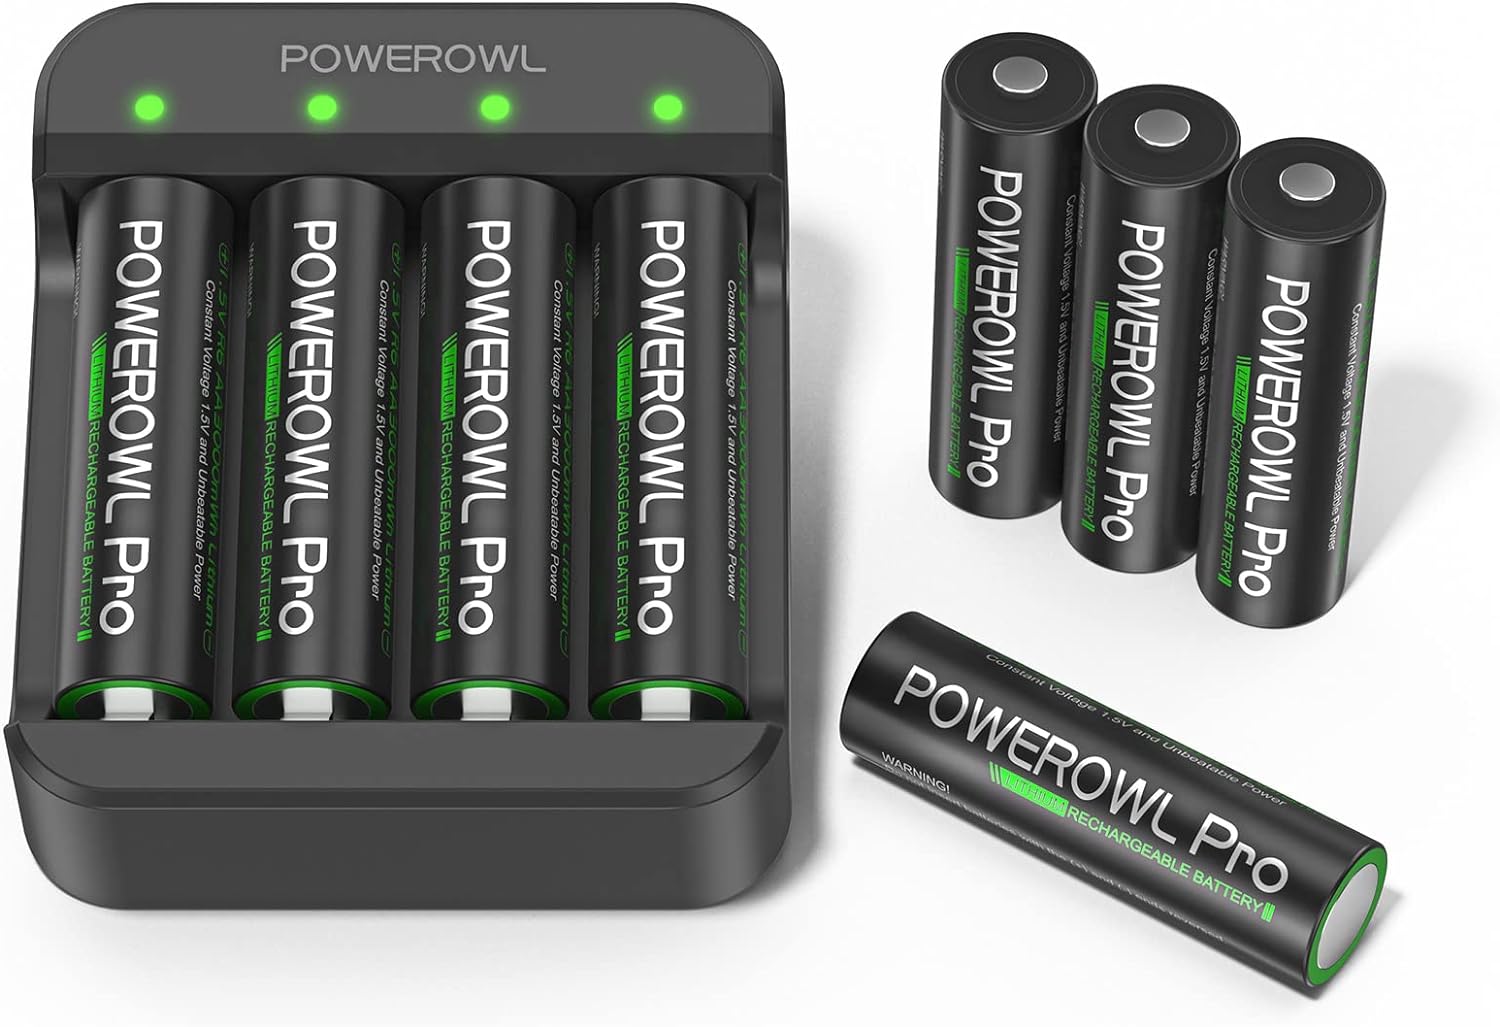 POWEROWL Lithium Rechargeable - 8 AA Batteries w/Charger $24.99